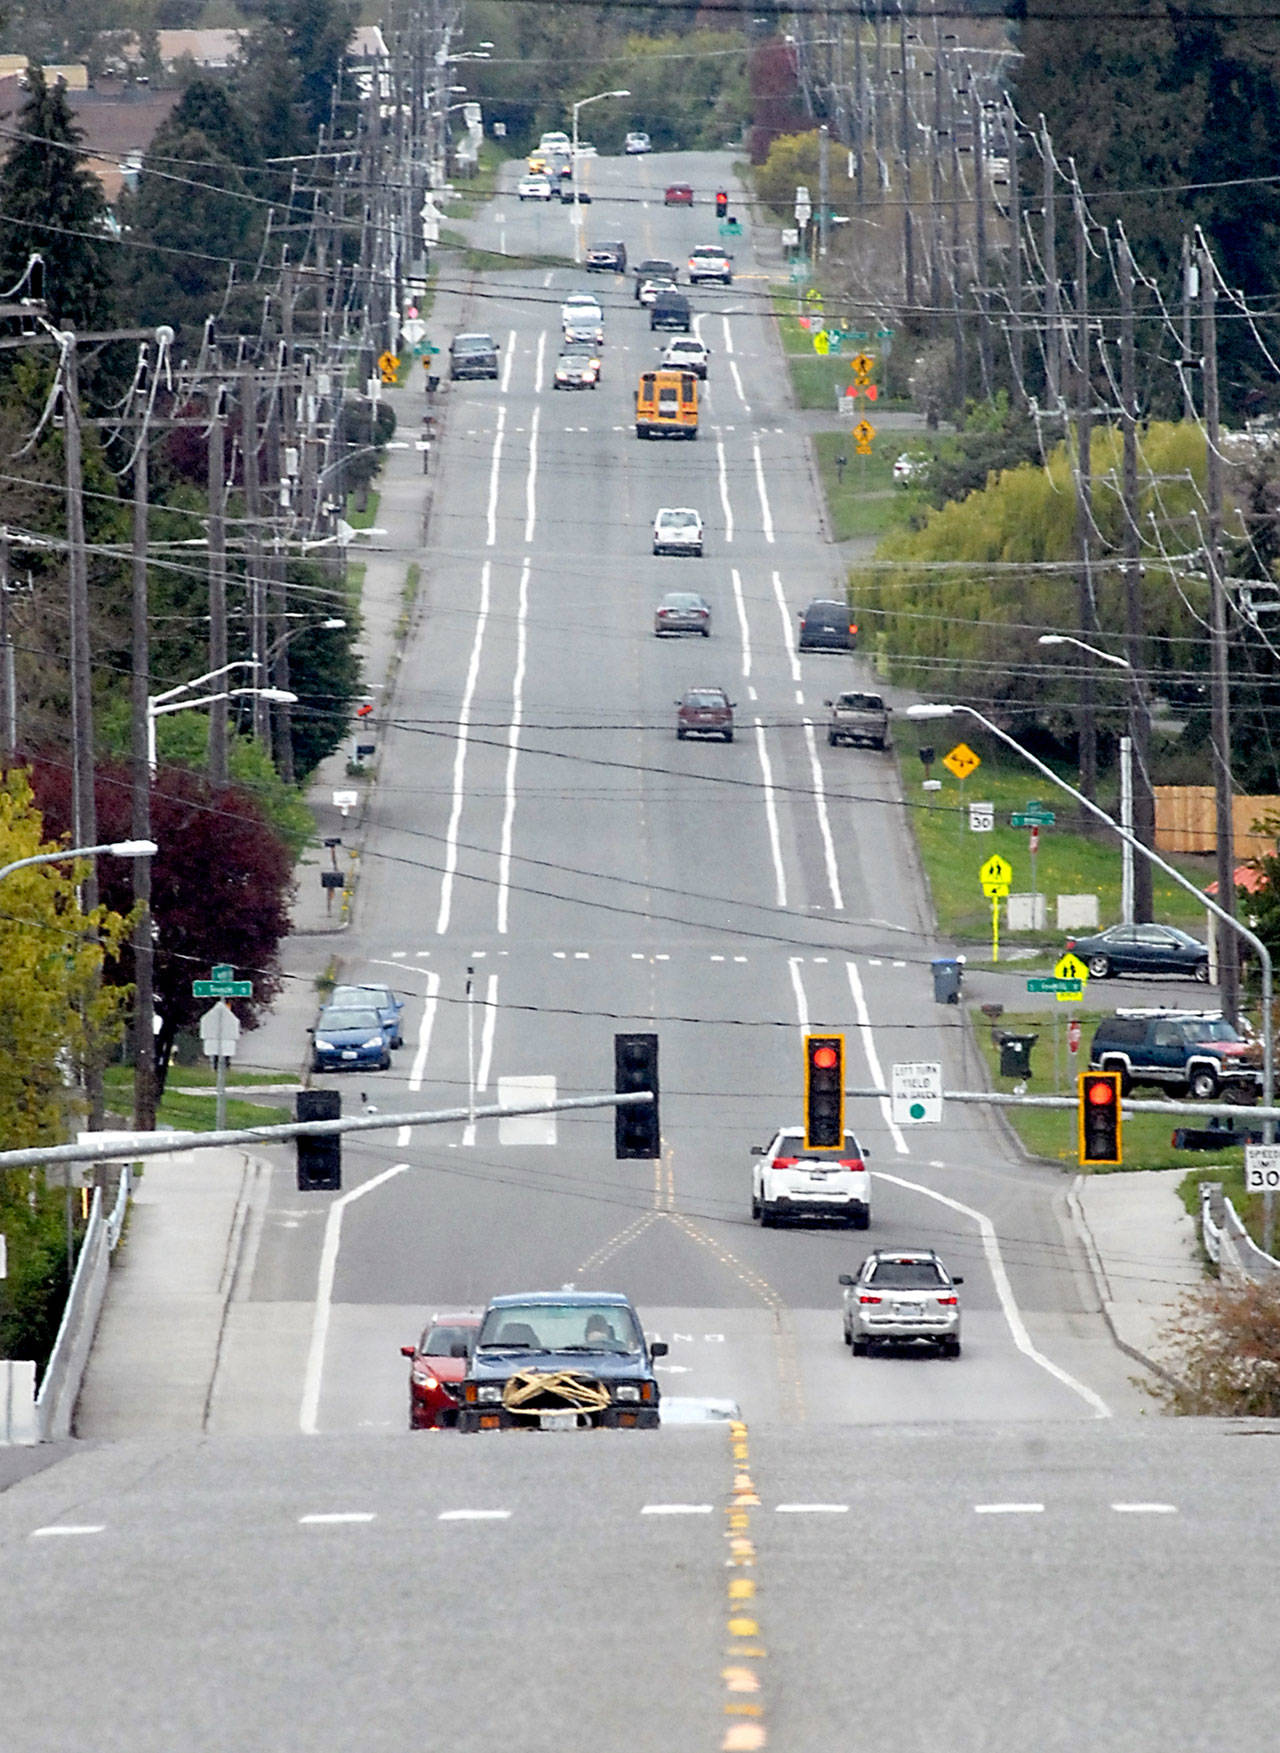 A section of Lauridsen Boulevard from Race Street to Lauridsen Court is slated for improvement this summer, including repaving and reworking of the intersection at Peabody Street. (Keith Thorpe/Peninsula Daily News)